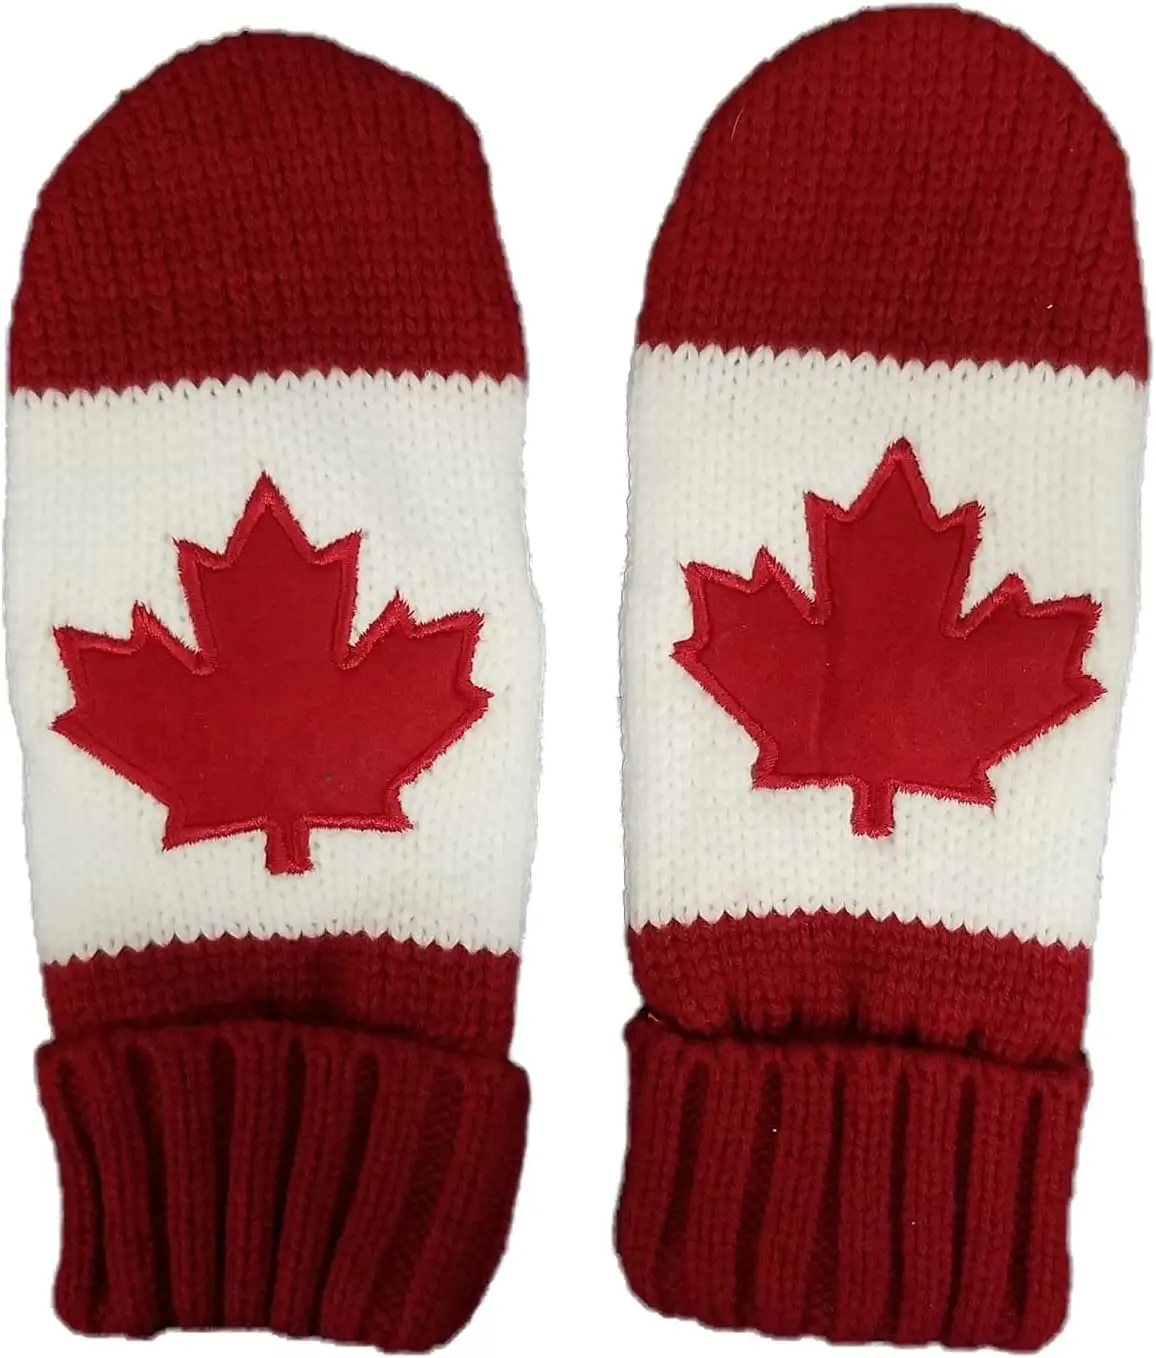 Red Maple Leaf Canada Gloves Winter Custom Knit Canadian Warm Sports Mittens For Adults